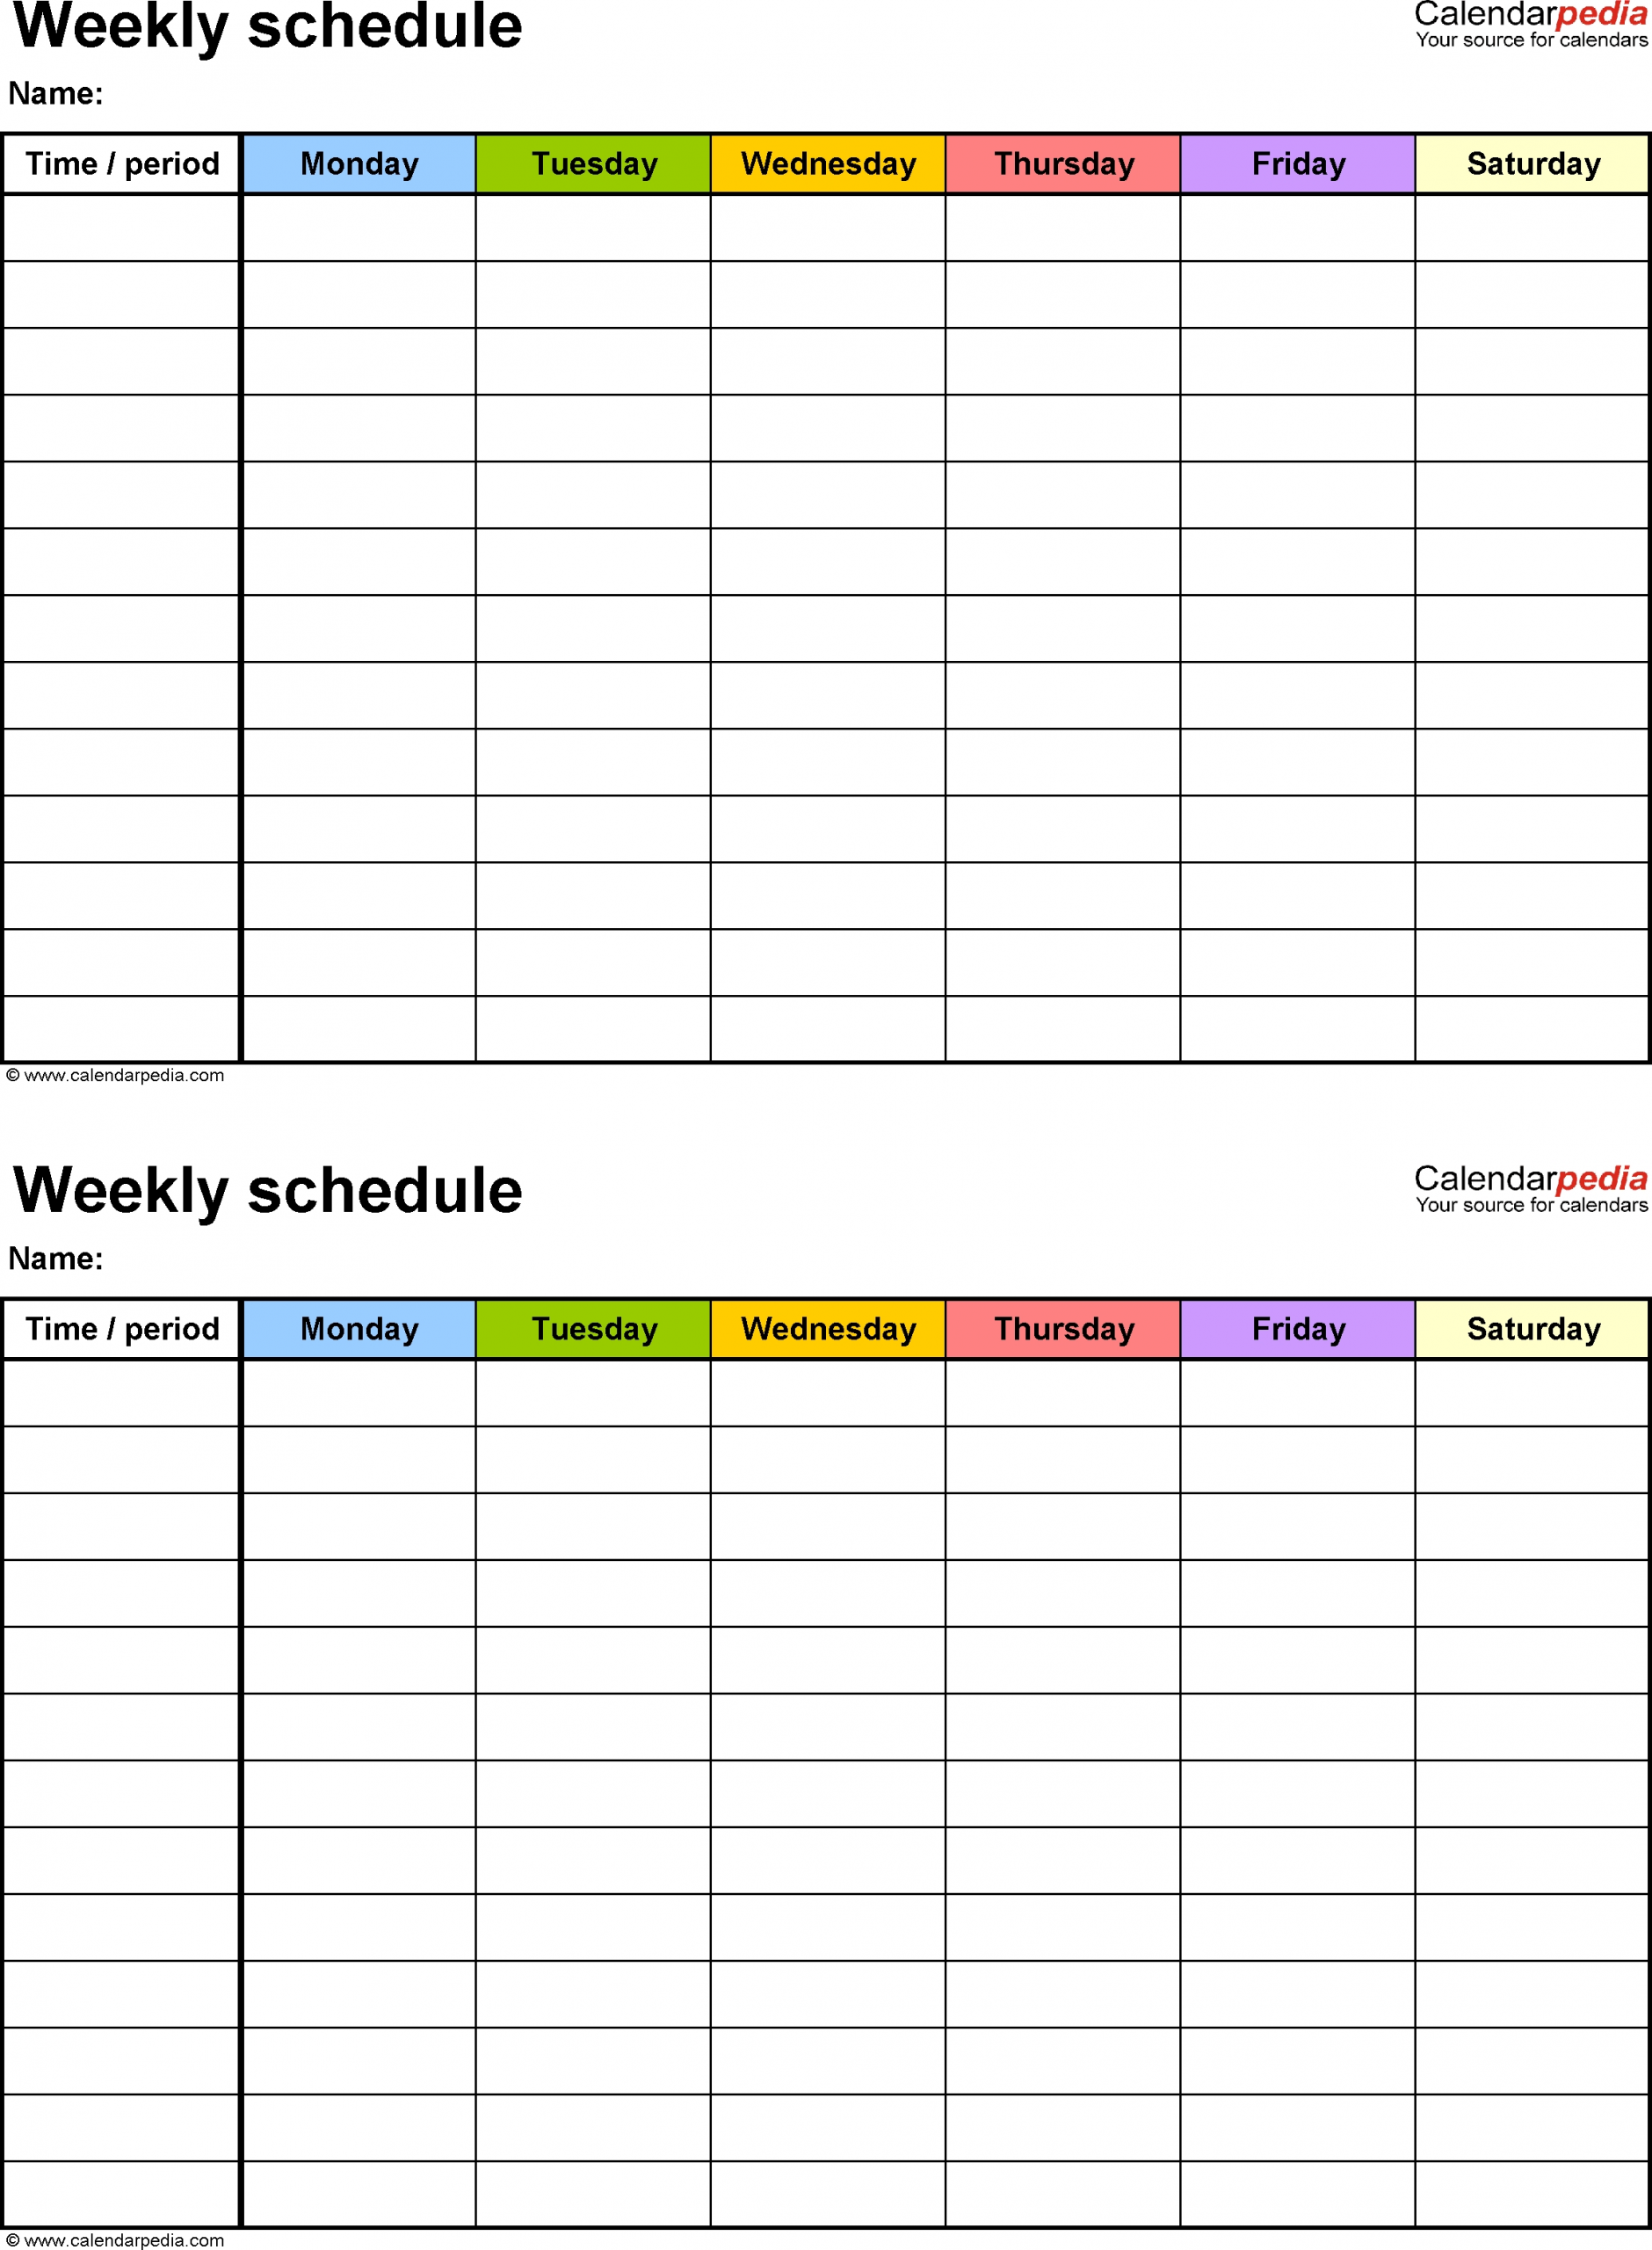 Weekly Schedule Template For Word Version 9: 2 Schedules On